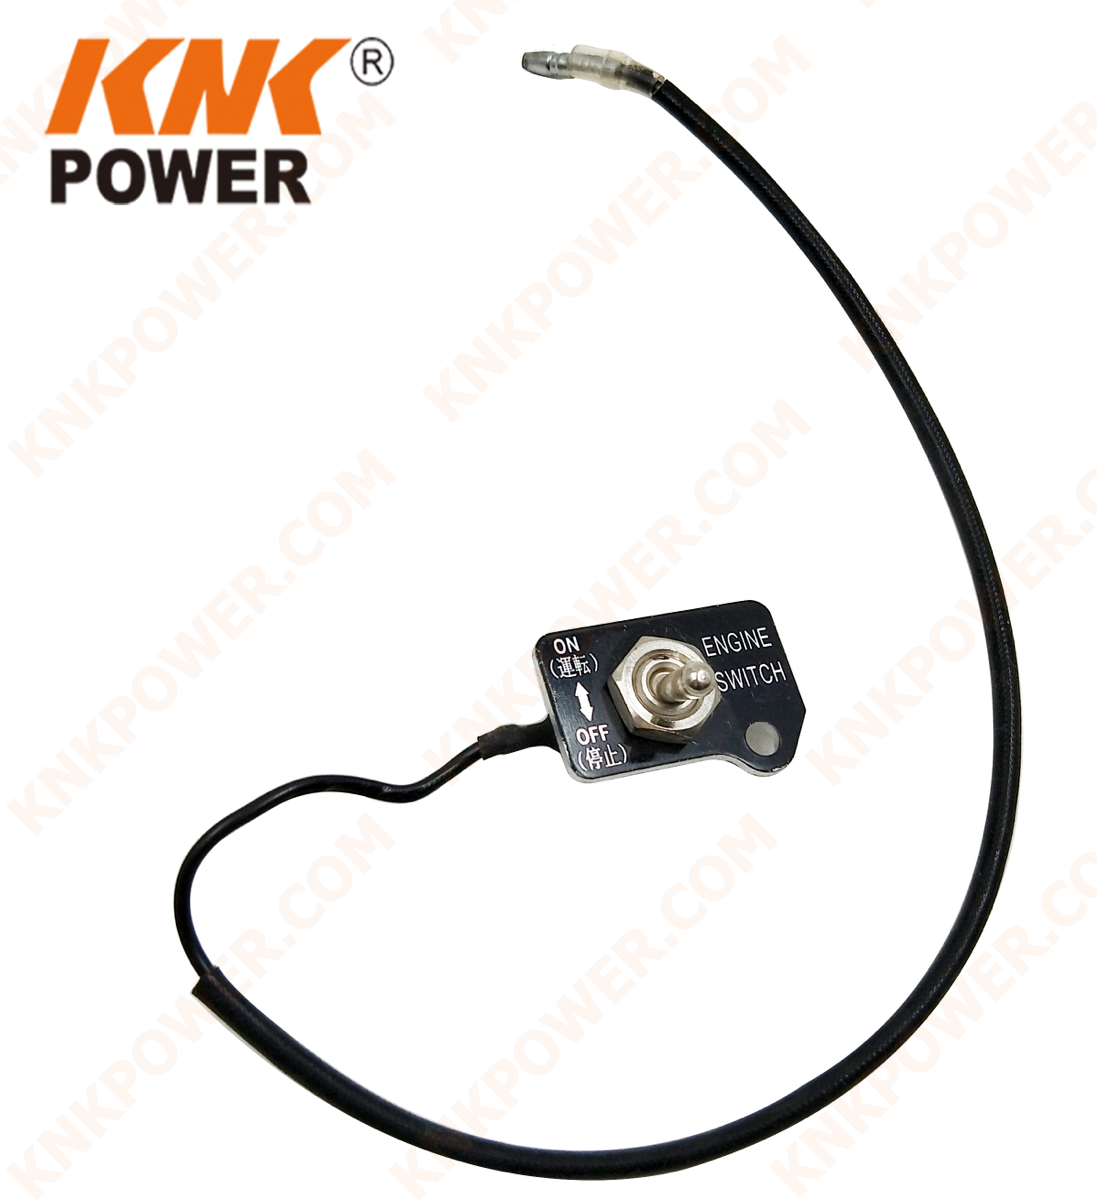 knkpower product image 19193 